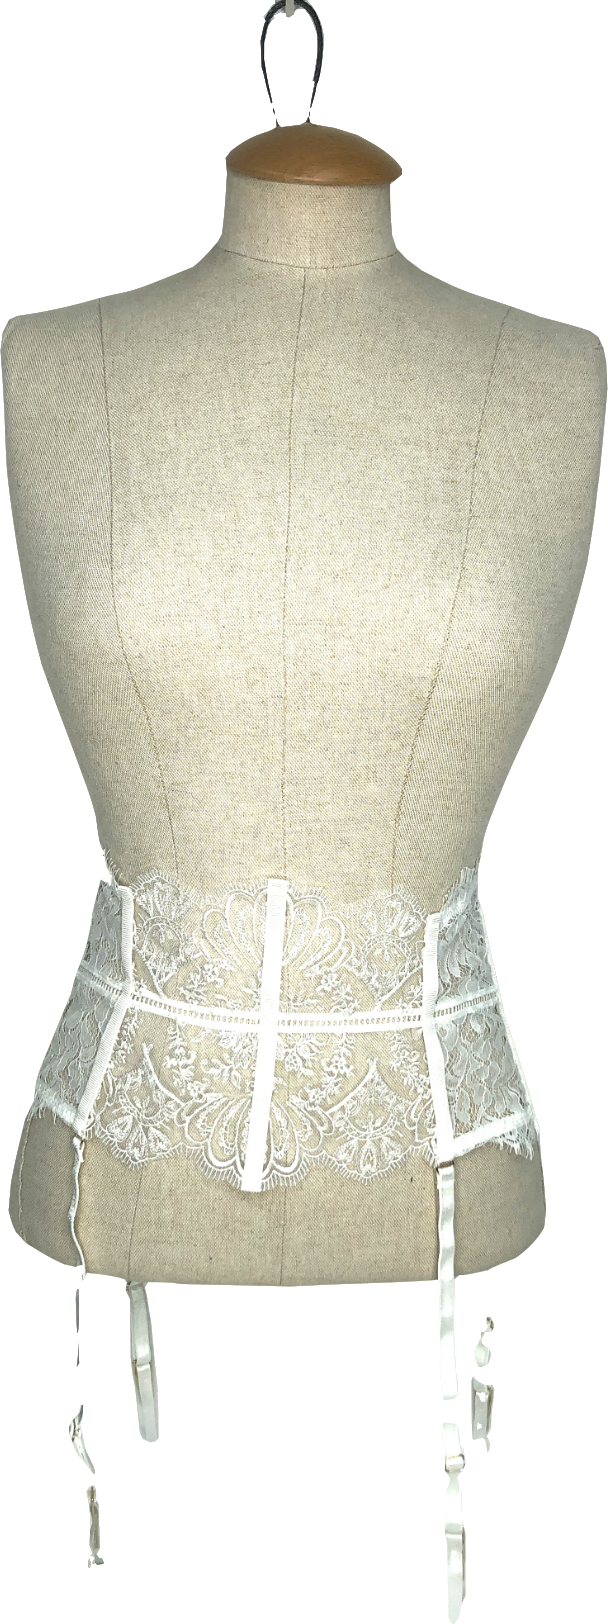 Karen Millen White Embroidery And Lace Deep Suspender UK S